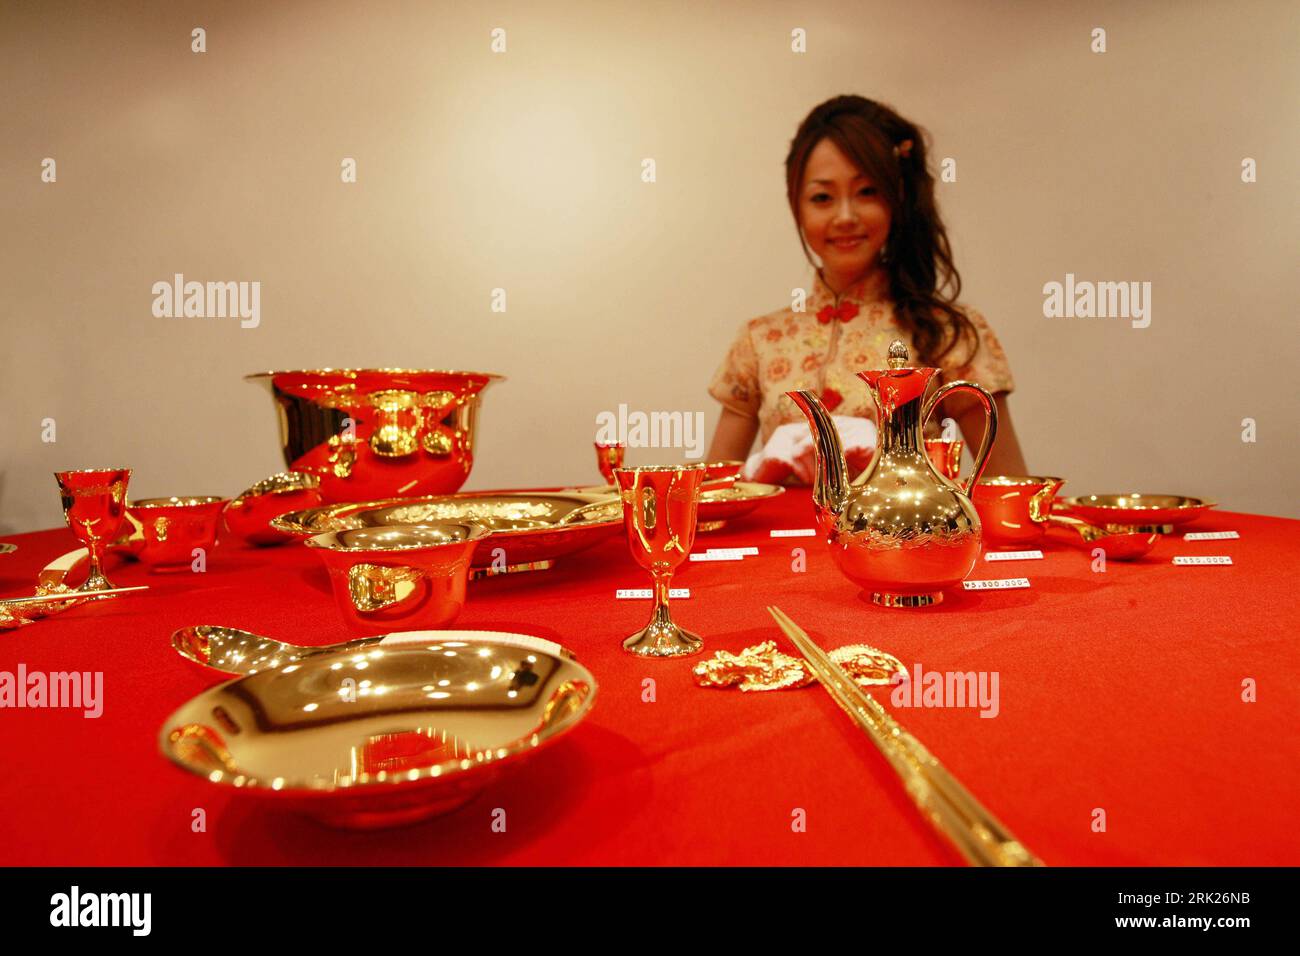 Bildnummer: 53151706  Datum: 02.09.2008  Copyright: imago/Xinhua  A staff member of Ginza Tanaka shows one piece of 24K gold Chinese-style dishware set in Ginza, Tokyo, capital of Japan, Sept. 2, 2008. The set was released by Ginza Tanaka including 13 kinds, 31 pieces dishwares such as cups, plates, bowls and chopsticks on Tuesday kbdig  einer Personal Mitglied of Ginza der Set war released by Ginza Tanaka namentlich 13 kinds, 31 Stücke dishwares solchen als cups, plates, Schüsseln und Stäbchen auf Tuesday und Geschirr quer    Bildnummer 53151706 Date 02 09 2008 Copyright Imago XINHUA a Staff Stock Photo